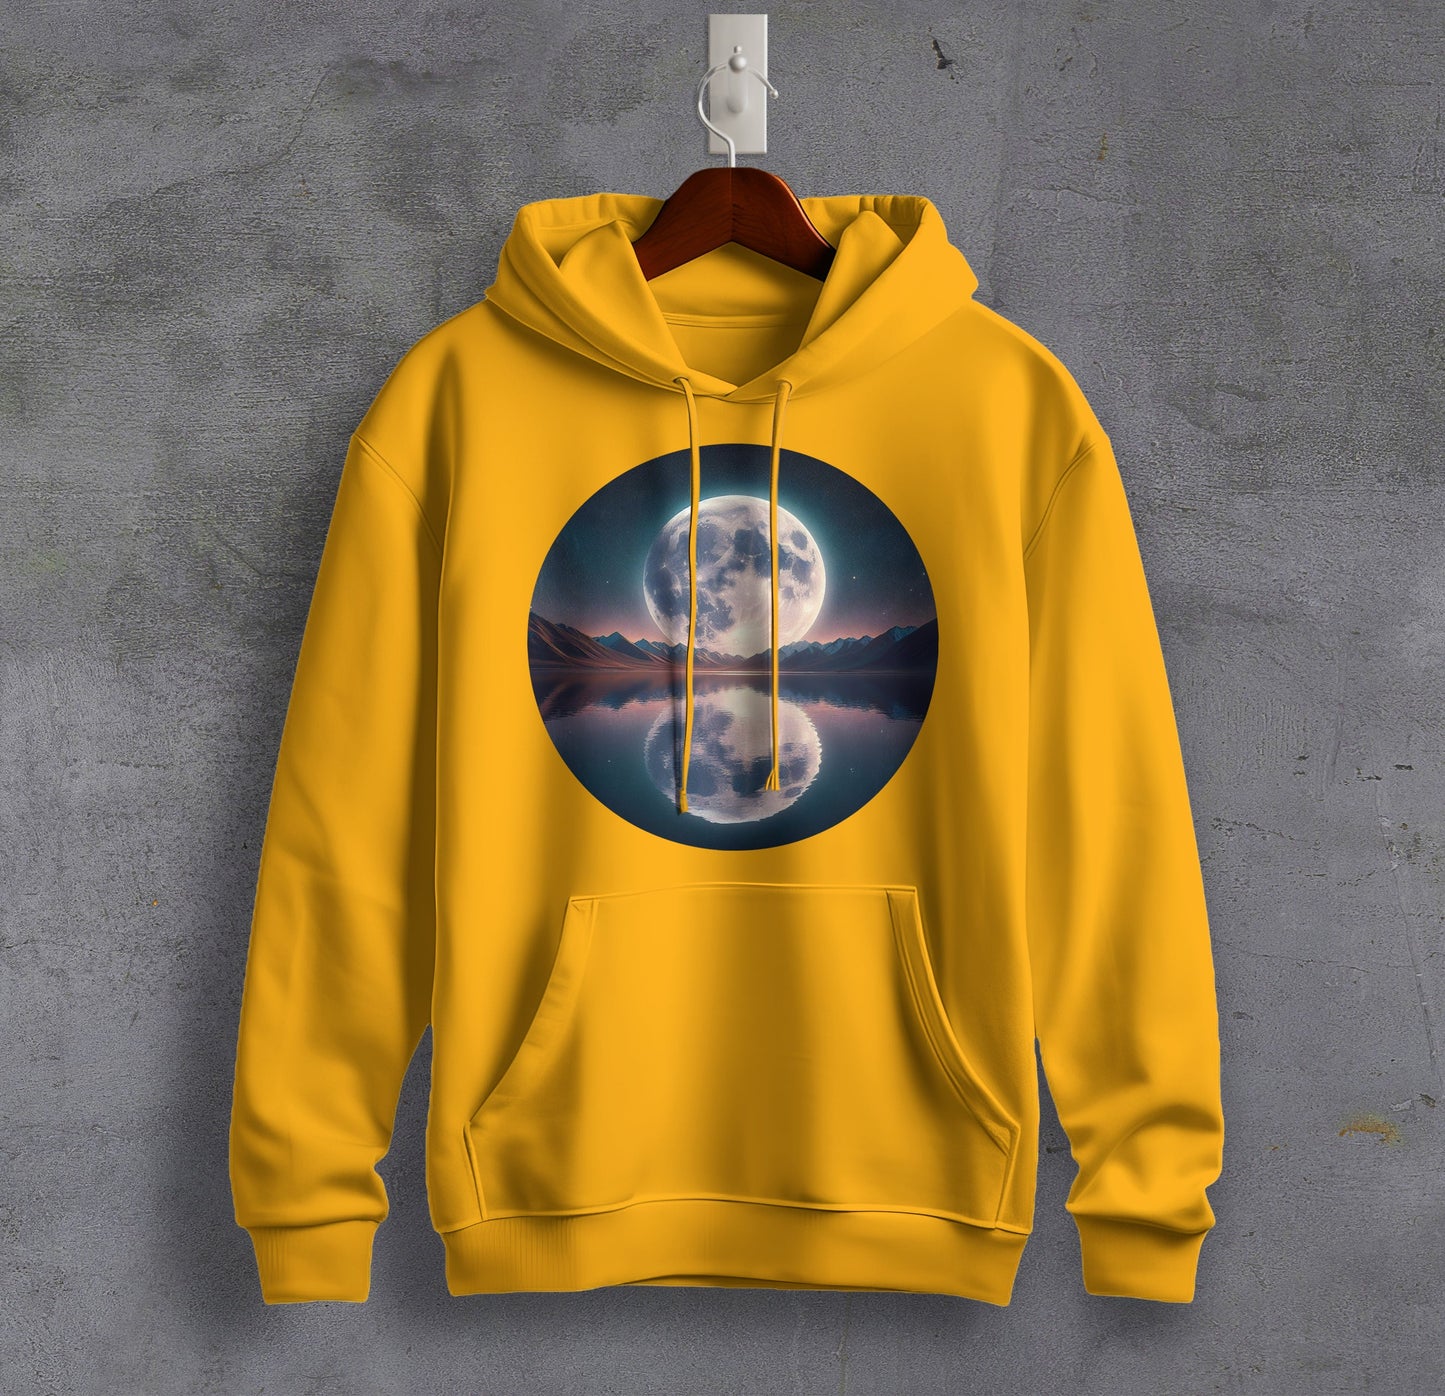 Reflections by the Lake - Full Moon Graphic Printed Hooded Sweat Shirt for Men - Cotton - Cosmos Sweat Shirt